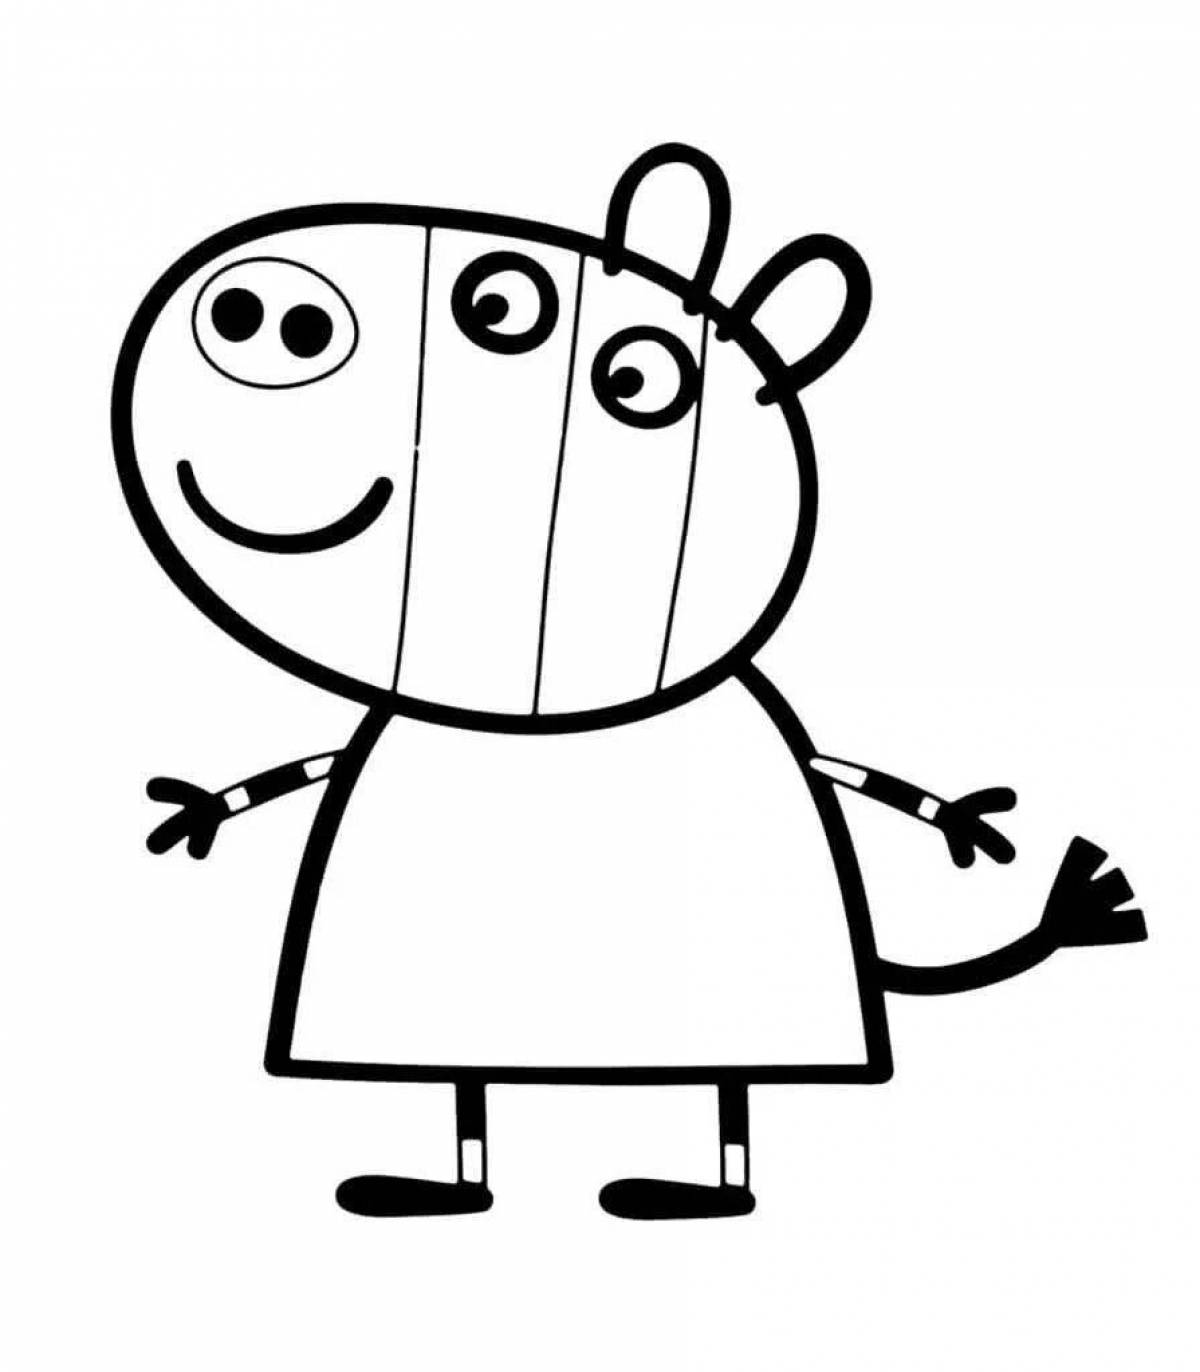 Charming coloring page peppa pig frog